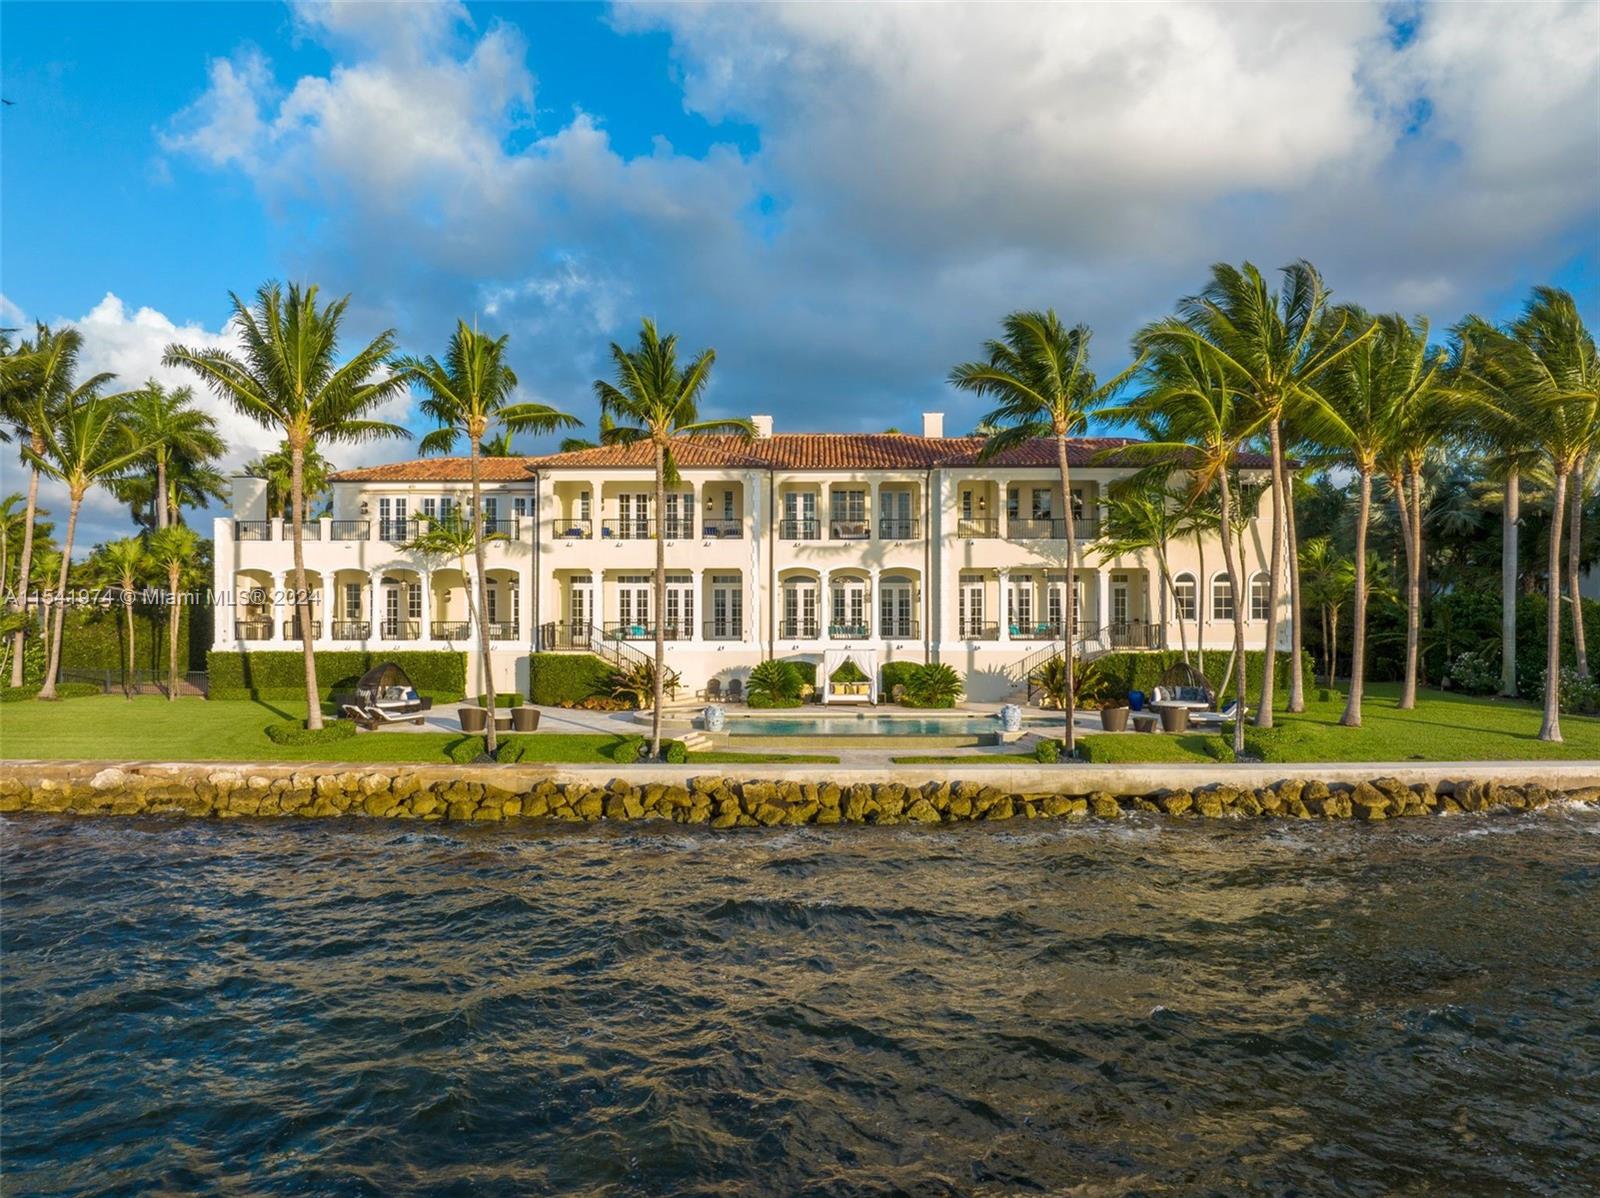 This magnificent 14,972-SF estate is on a lushly landscaped 35,389-SF lot in the highly desirable guard-gated community of Gables Estates, with 7 BR, 8.5 BA and 225 ft of waterfront. Designed to maximize the water views, the home offers breathtaking views of Biscayne Bay from nearly every room. No detail was spared in the highly customized residence, from the gourmet kitchen, primary suite, an impressive 2,700-bottle capacity wine cellar, expansive balconies perfect for entertaining, and a fabulous pool and outdoor kitchen. The smart home is equipped with a full-house generator, impact-resistant windows, and 4-car garage. Rounding out the luxurious experience is the home’s convenient access to fine dining, entertainment, airports and schools, making this a perfect family home.